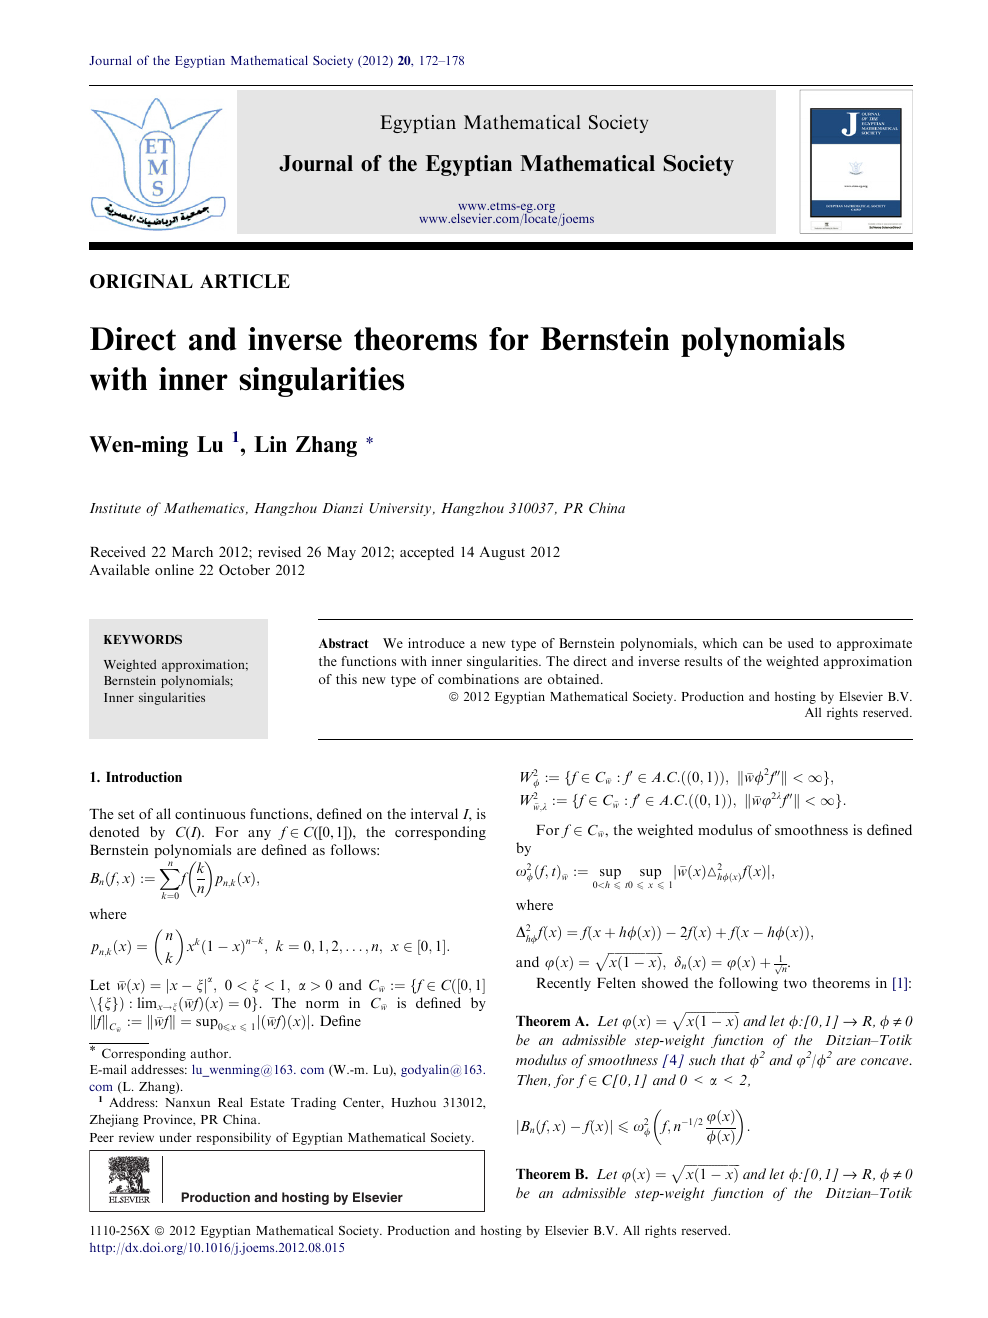 Direct And Inverse Theorems For Bernstein Polynomials With Inner Singularities Topic Of Research Paper In Mathematics Download Scholarly Article Pdf And Read For Free On Cyberleninka Open Science Hub